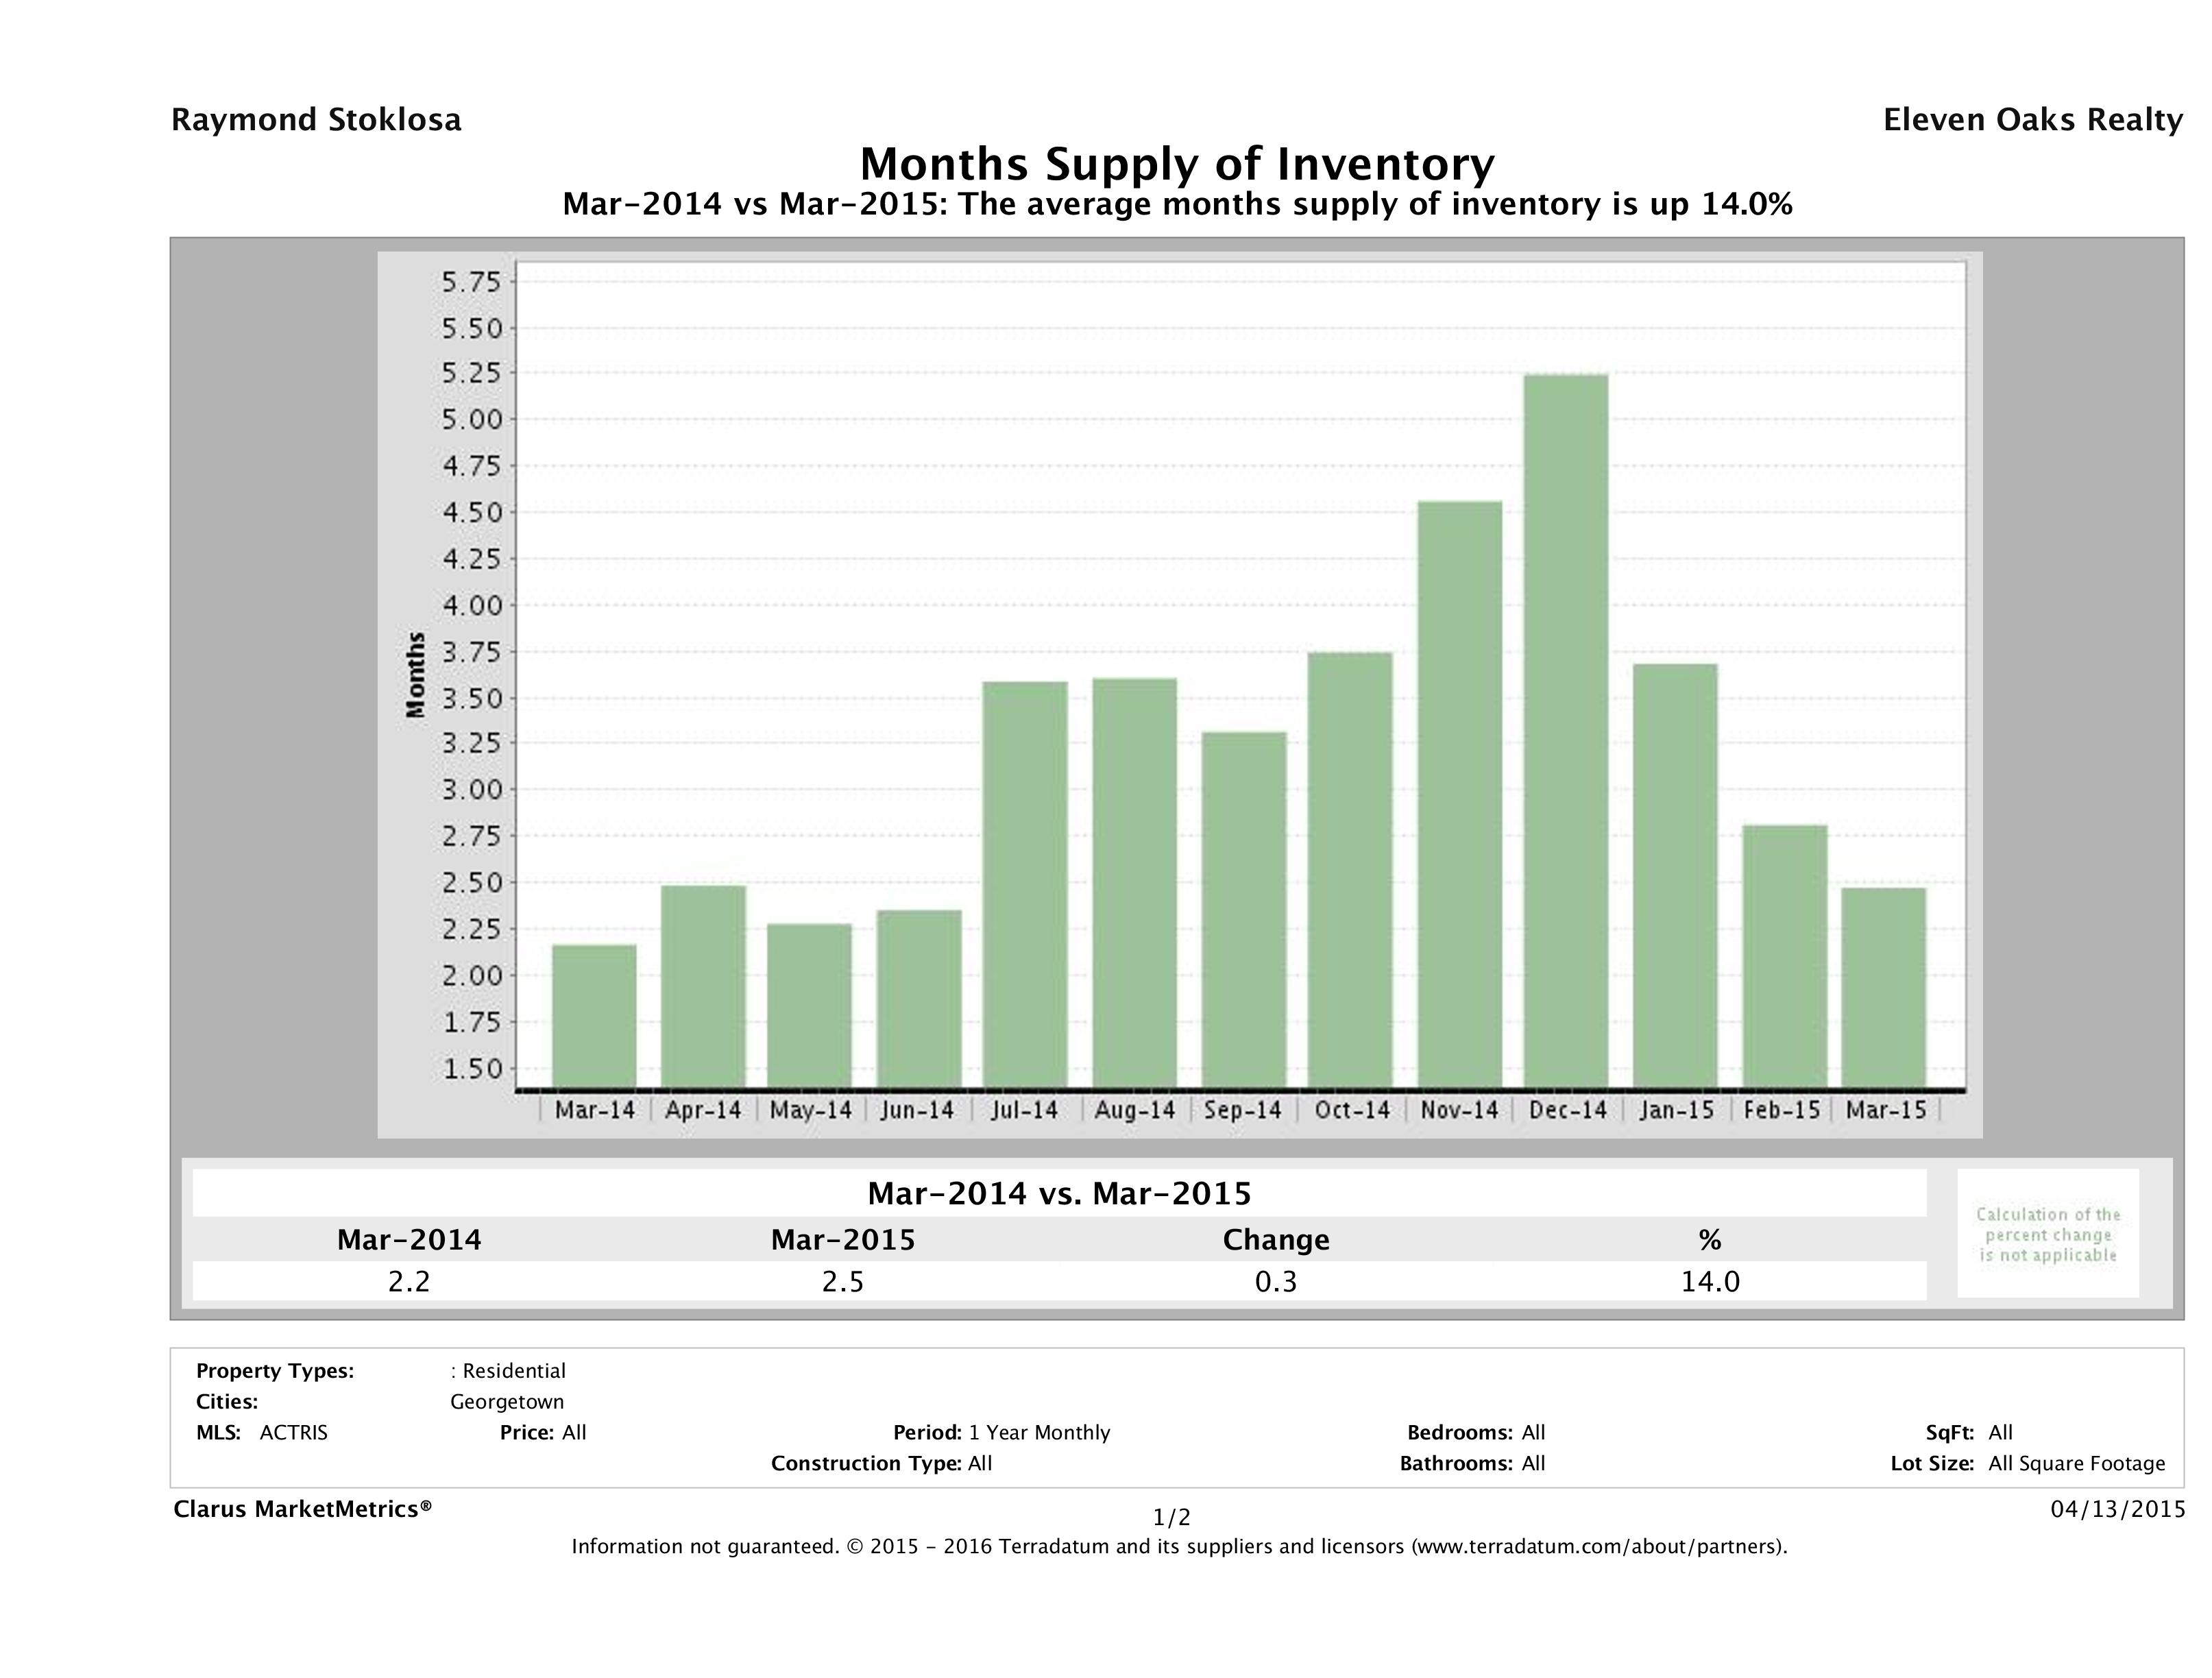 Georgetown single family home months inventory March 2015